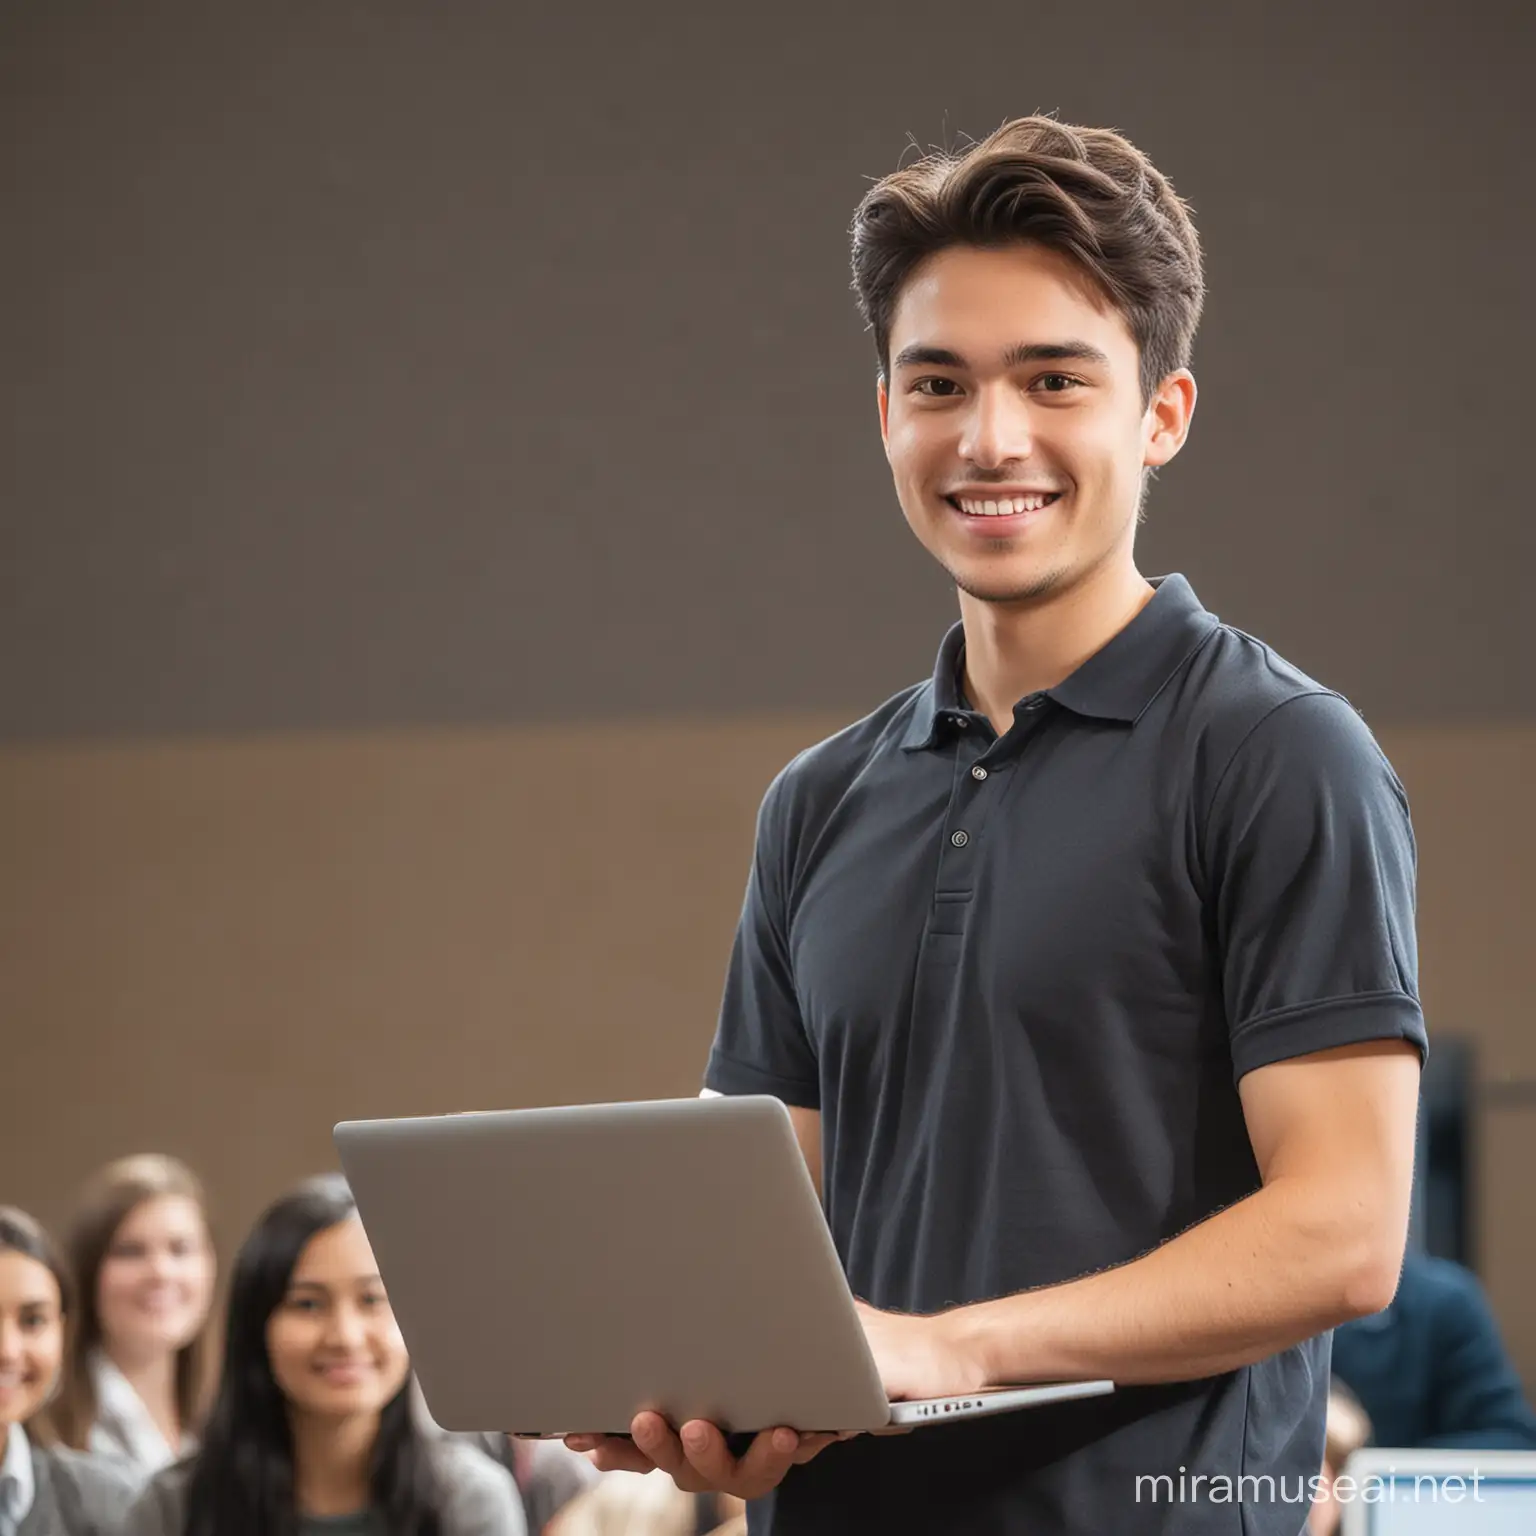 University Student Smiling While Presenting to Engaged Audience with Laptop